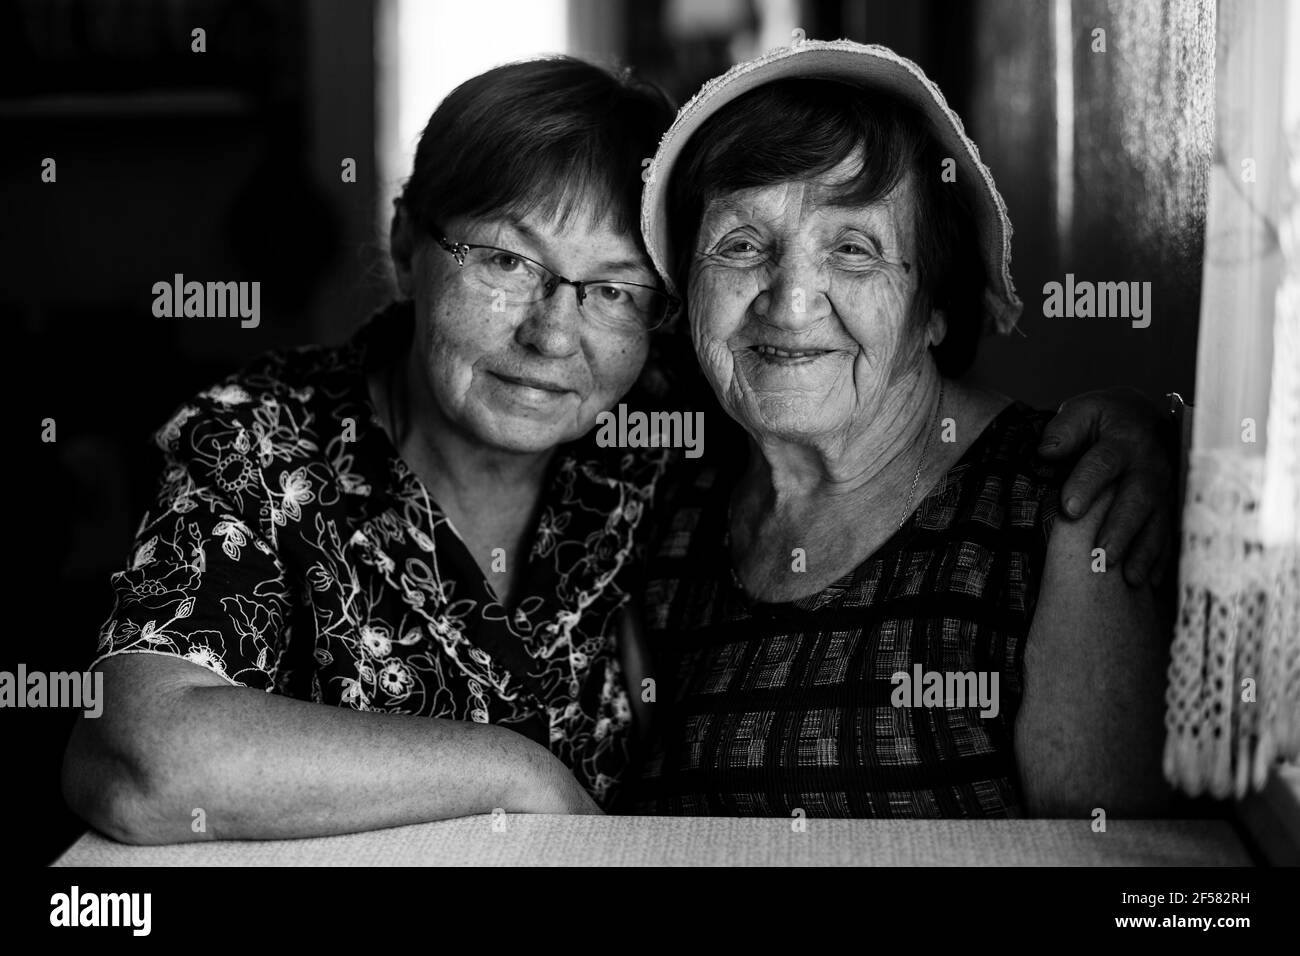 Pld woman and her mature daughter posing for portrait. Black and white ...